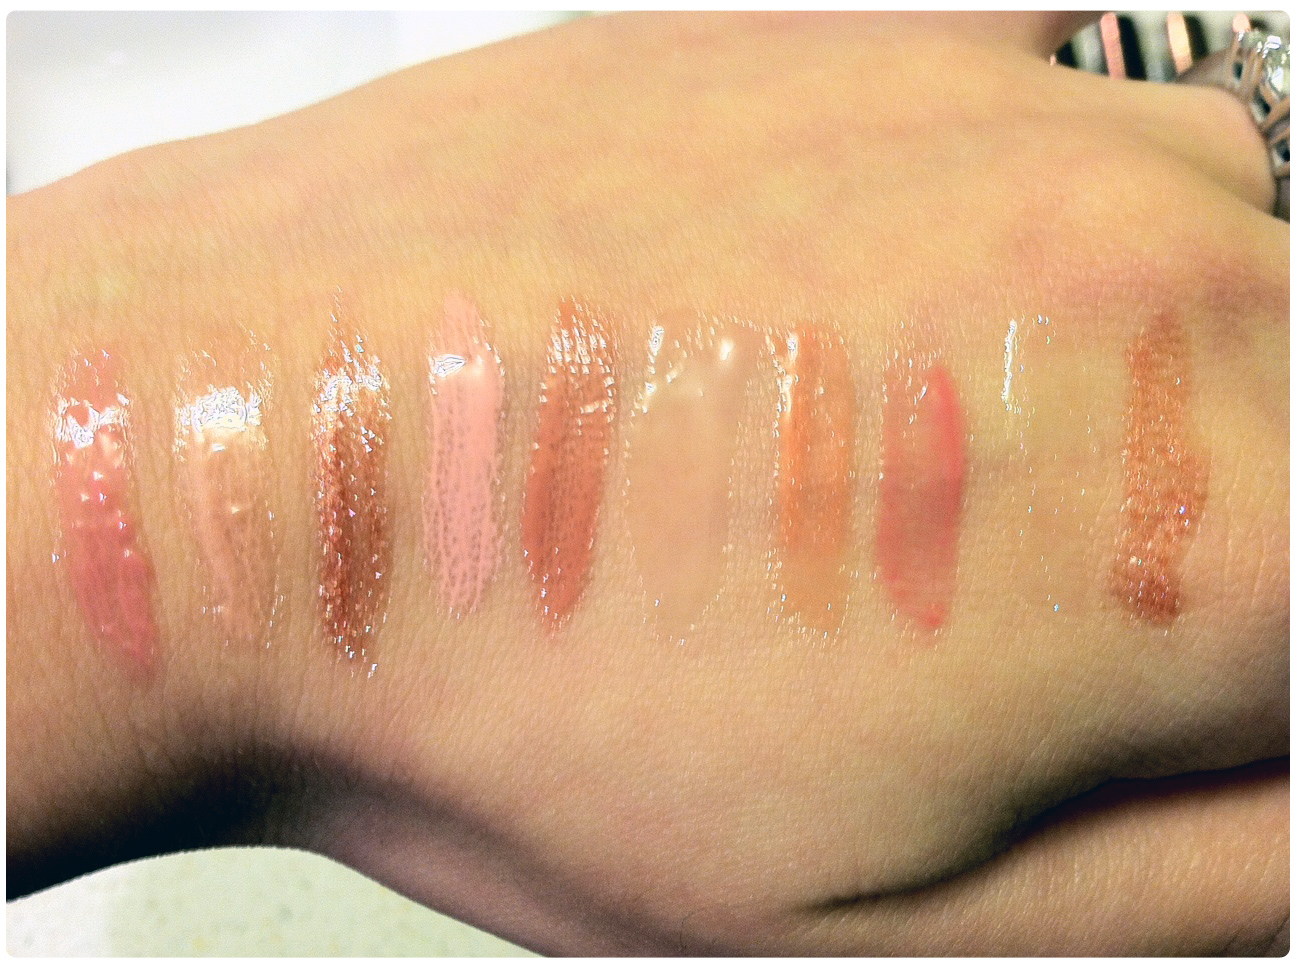 As you can see in the swatches